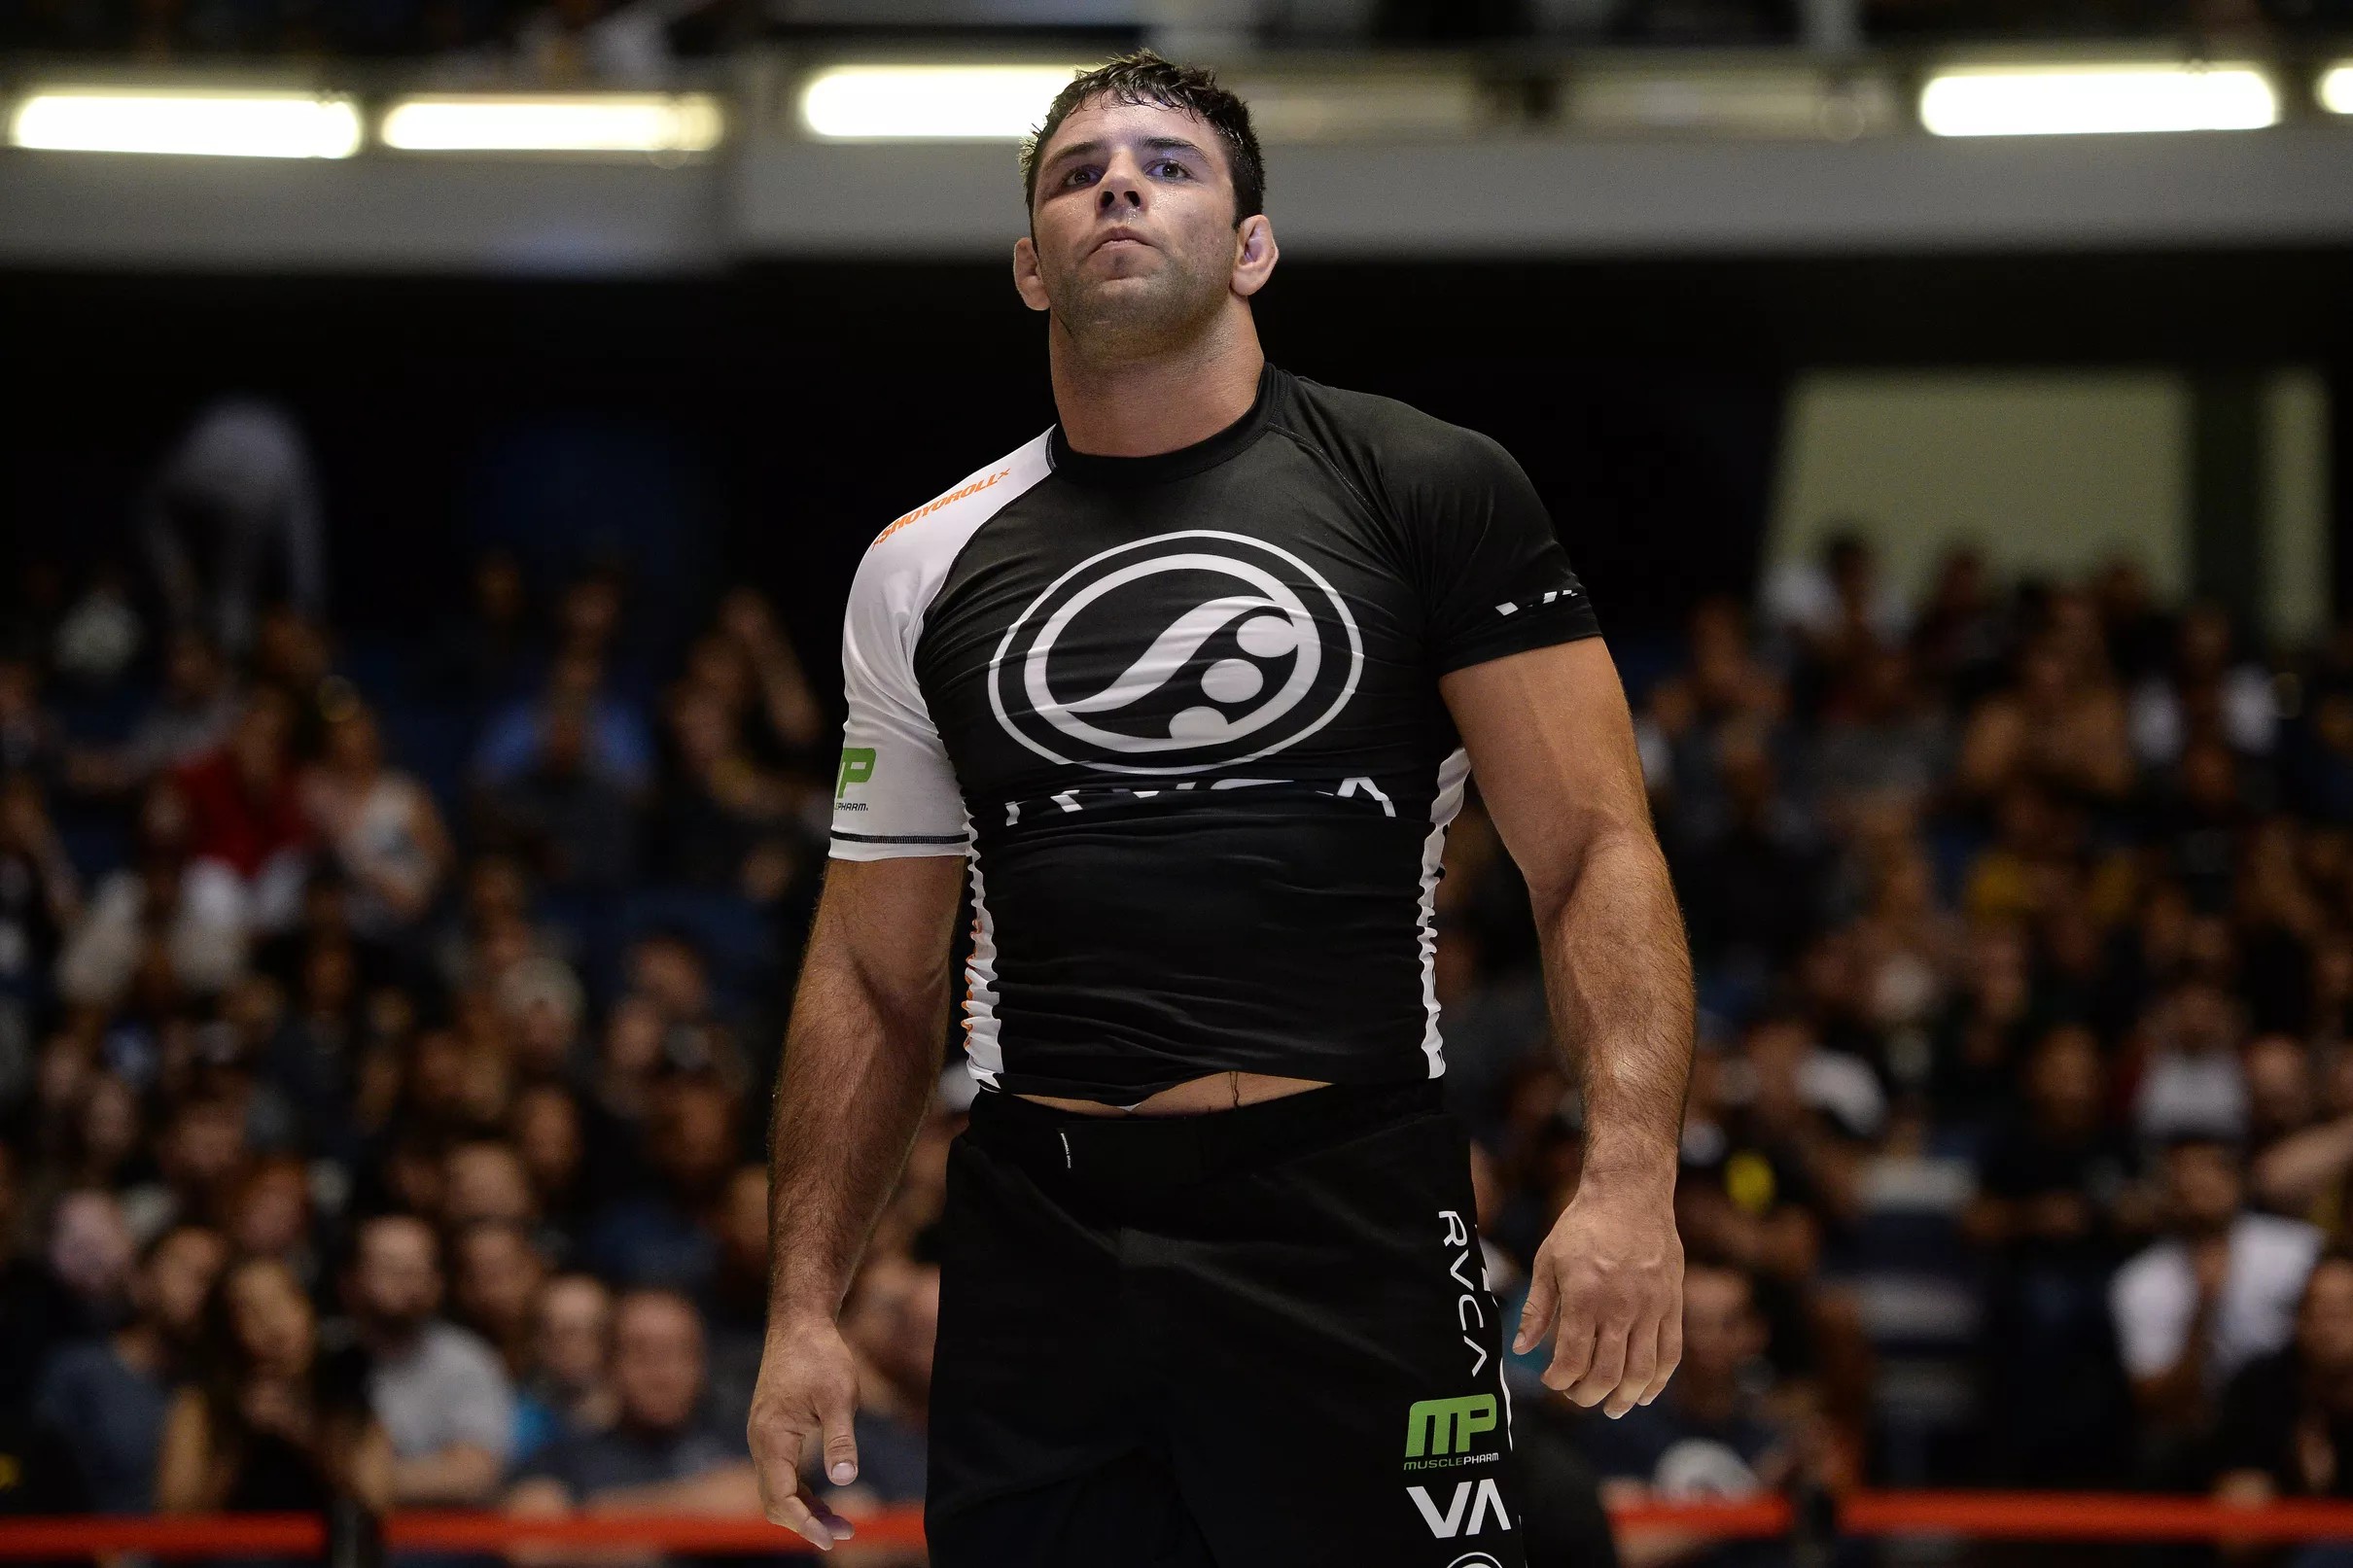 Grappling Report: Marcus 'Buchecha' Almeida Sidelined With Knee Injury